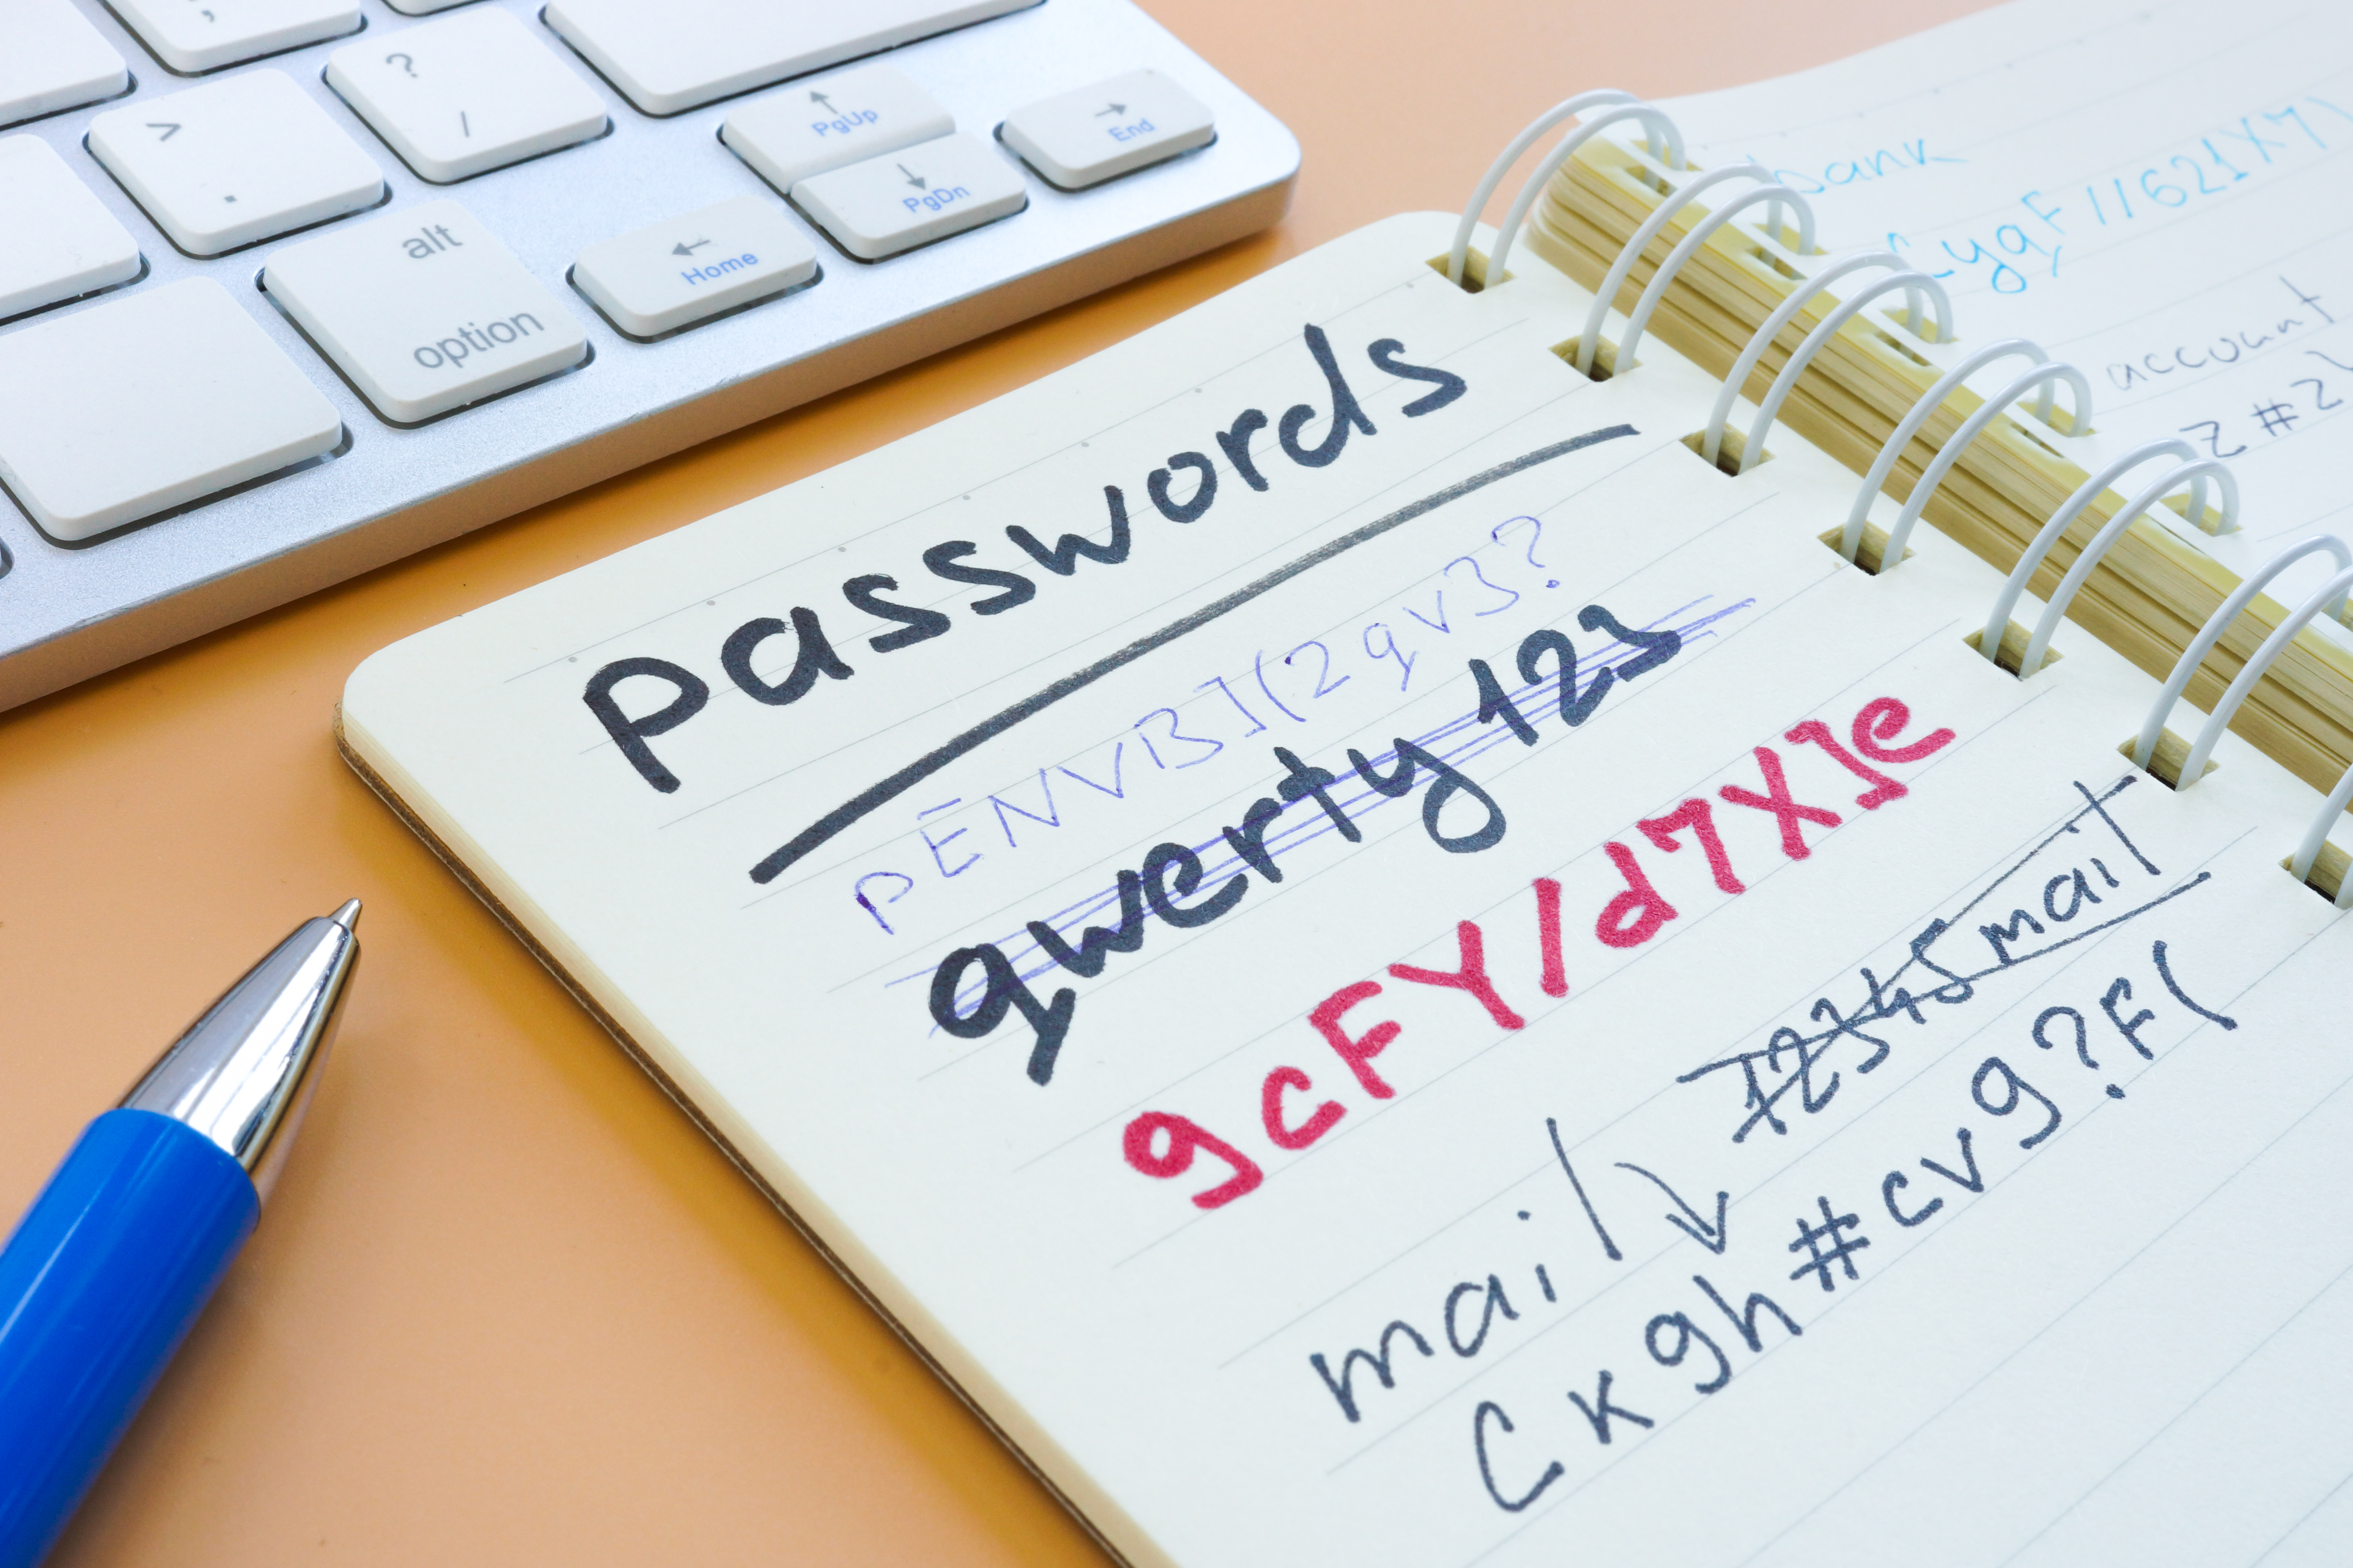 secure passwords management is a critical step in keeping employees and businesses safe